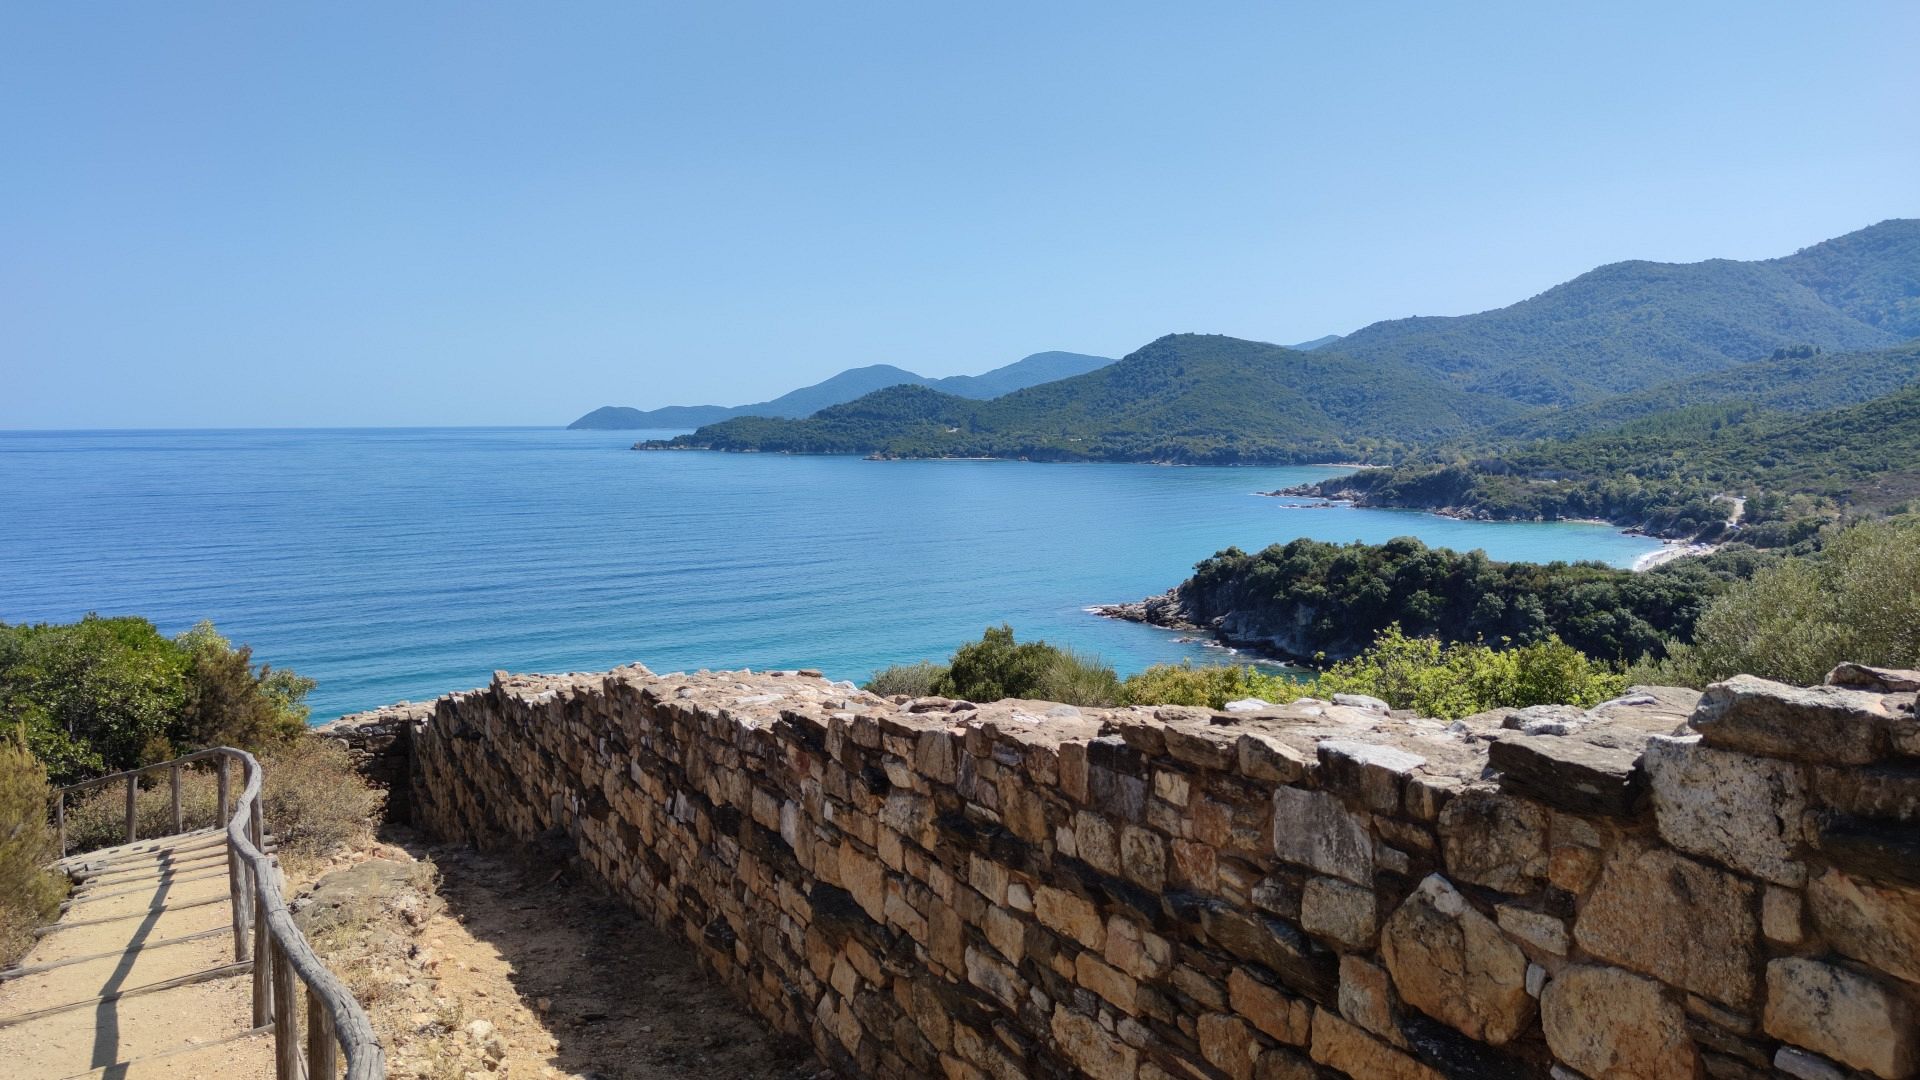 What to see in Halkidiki by car